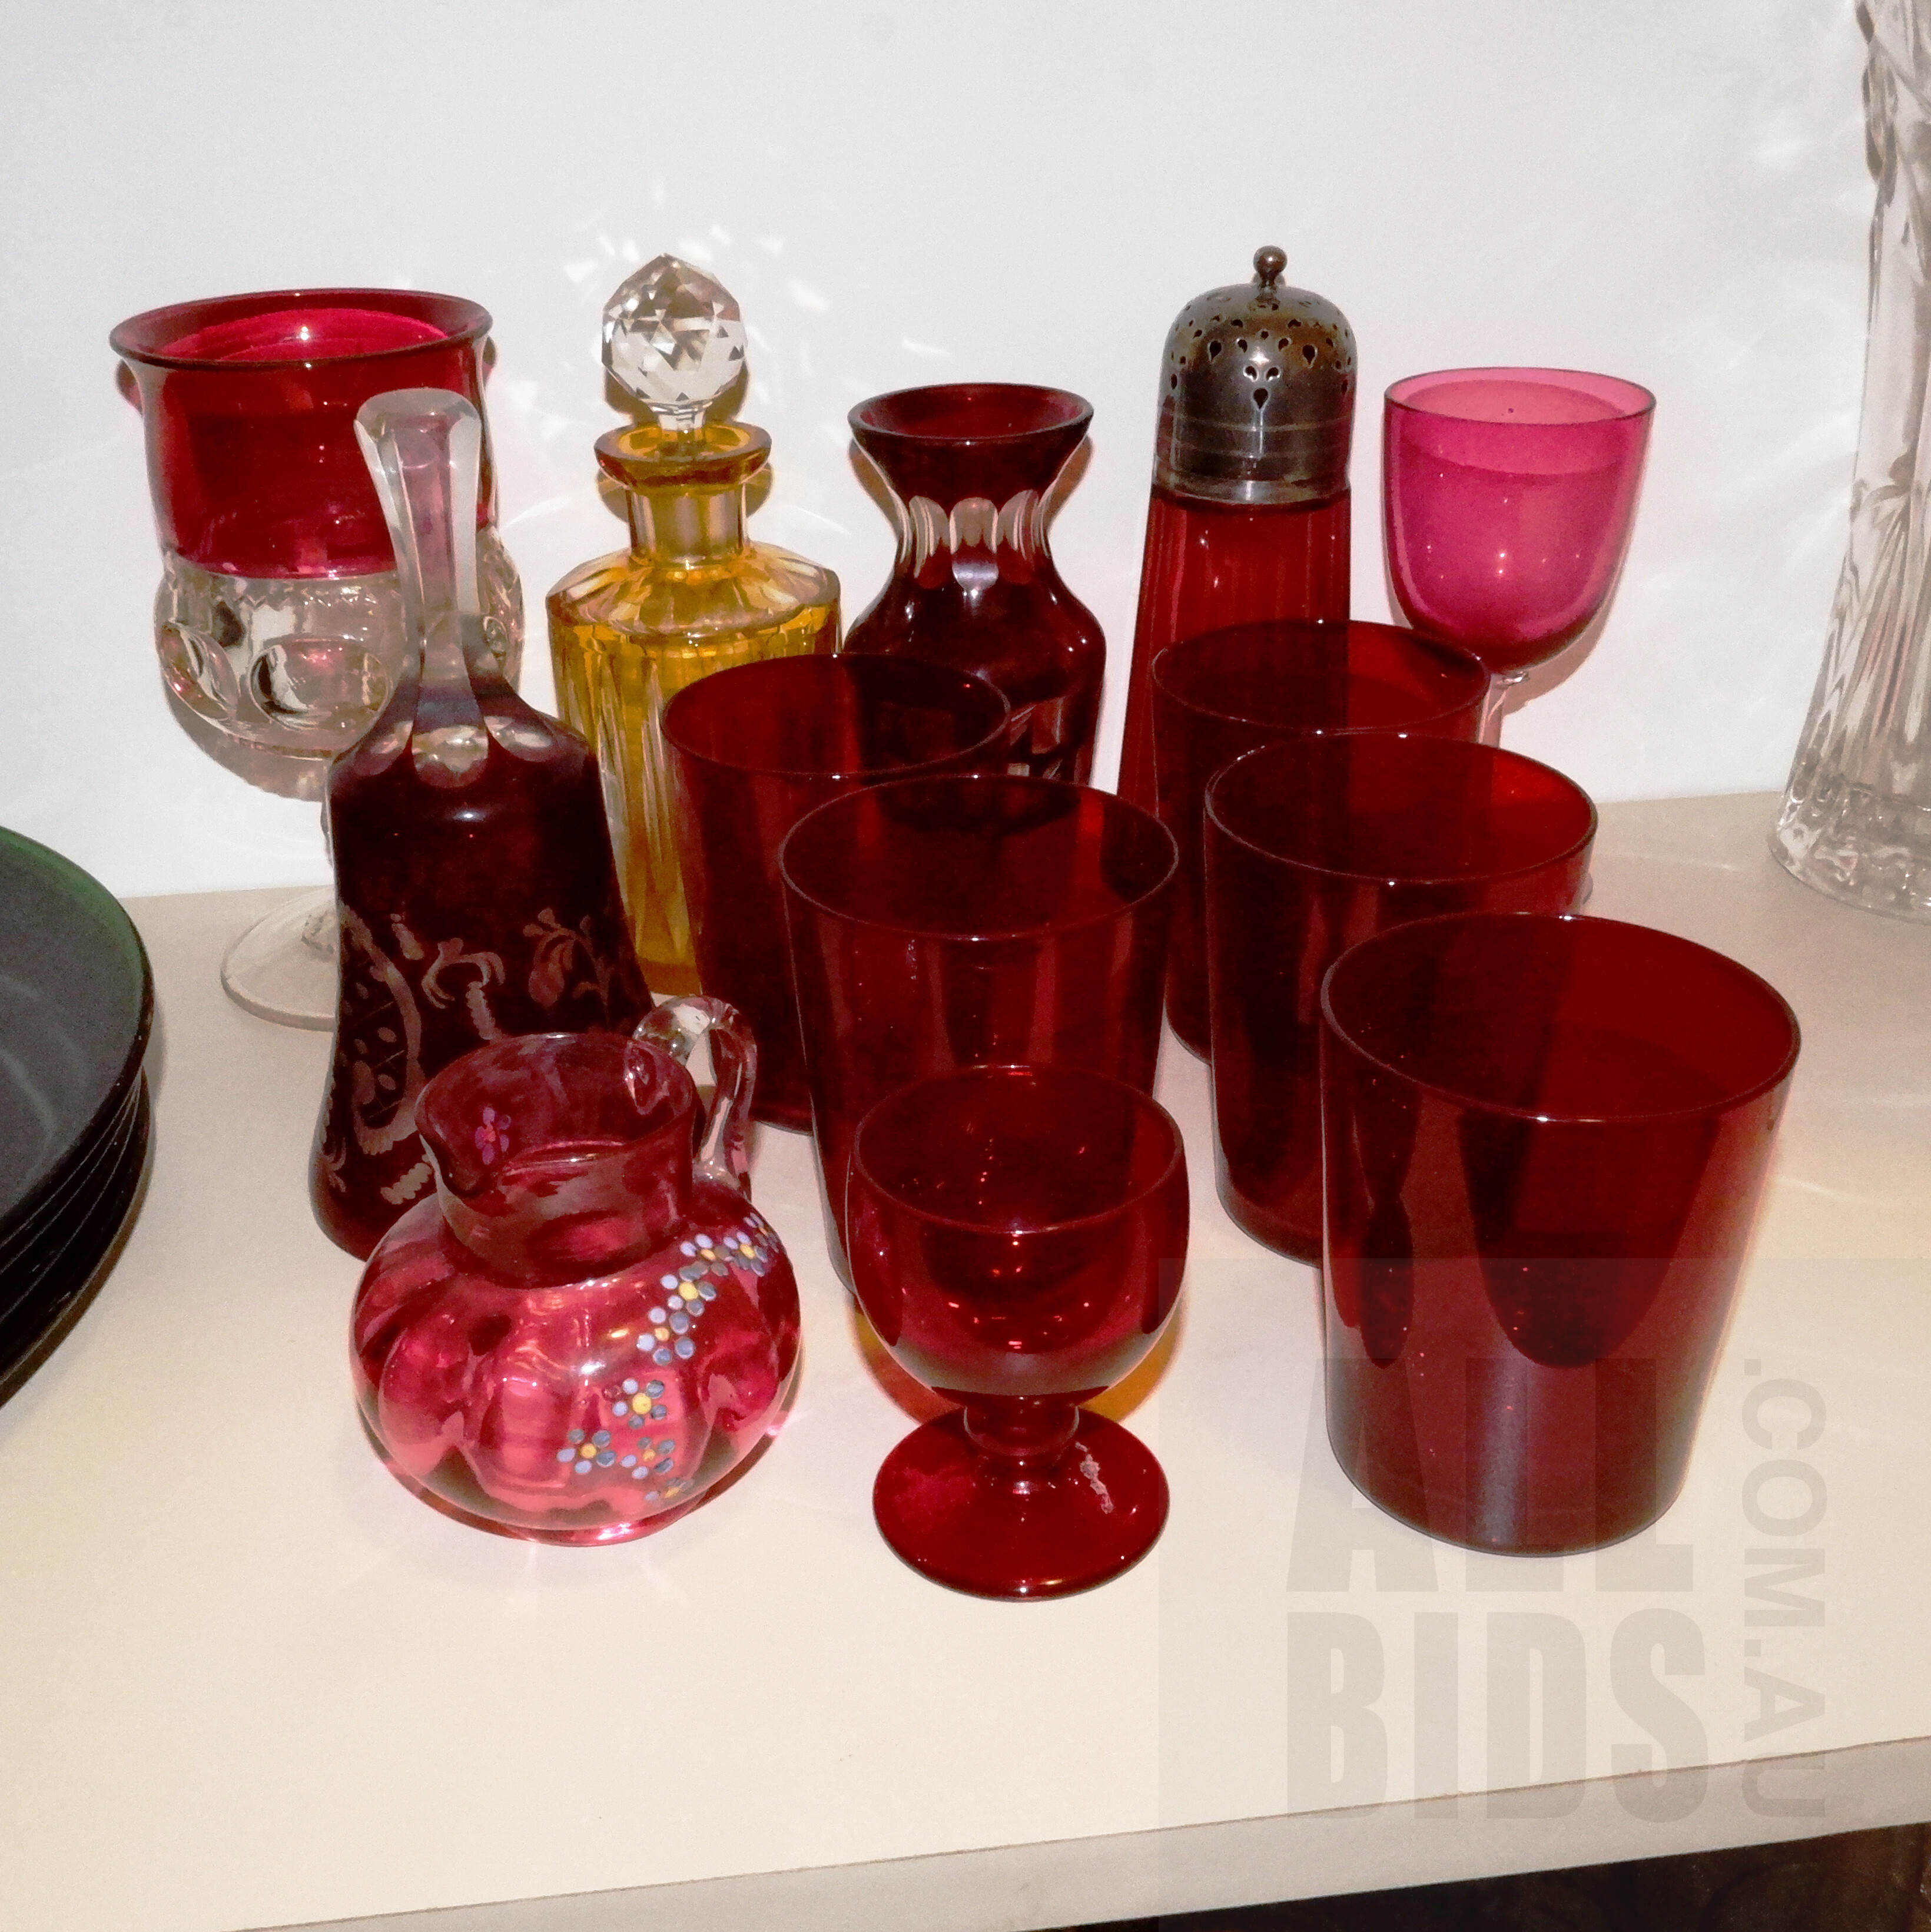 'Collection of Antique and Vintage Ruby Flashed Crystal and Glassware, Including Pepper Pot, Bell and More'